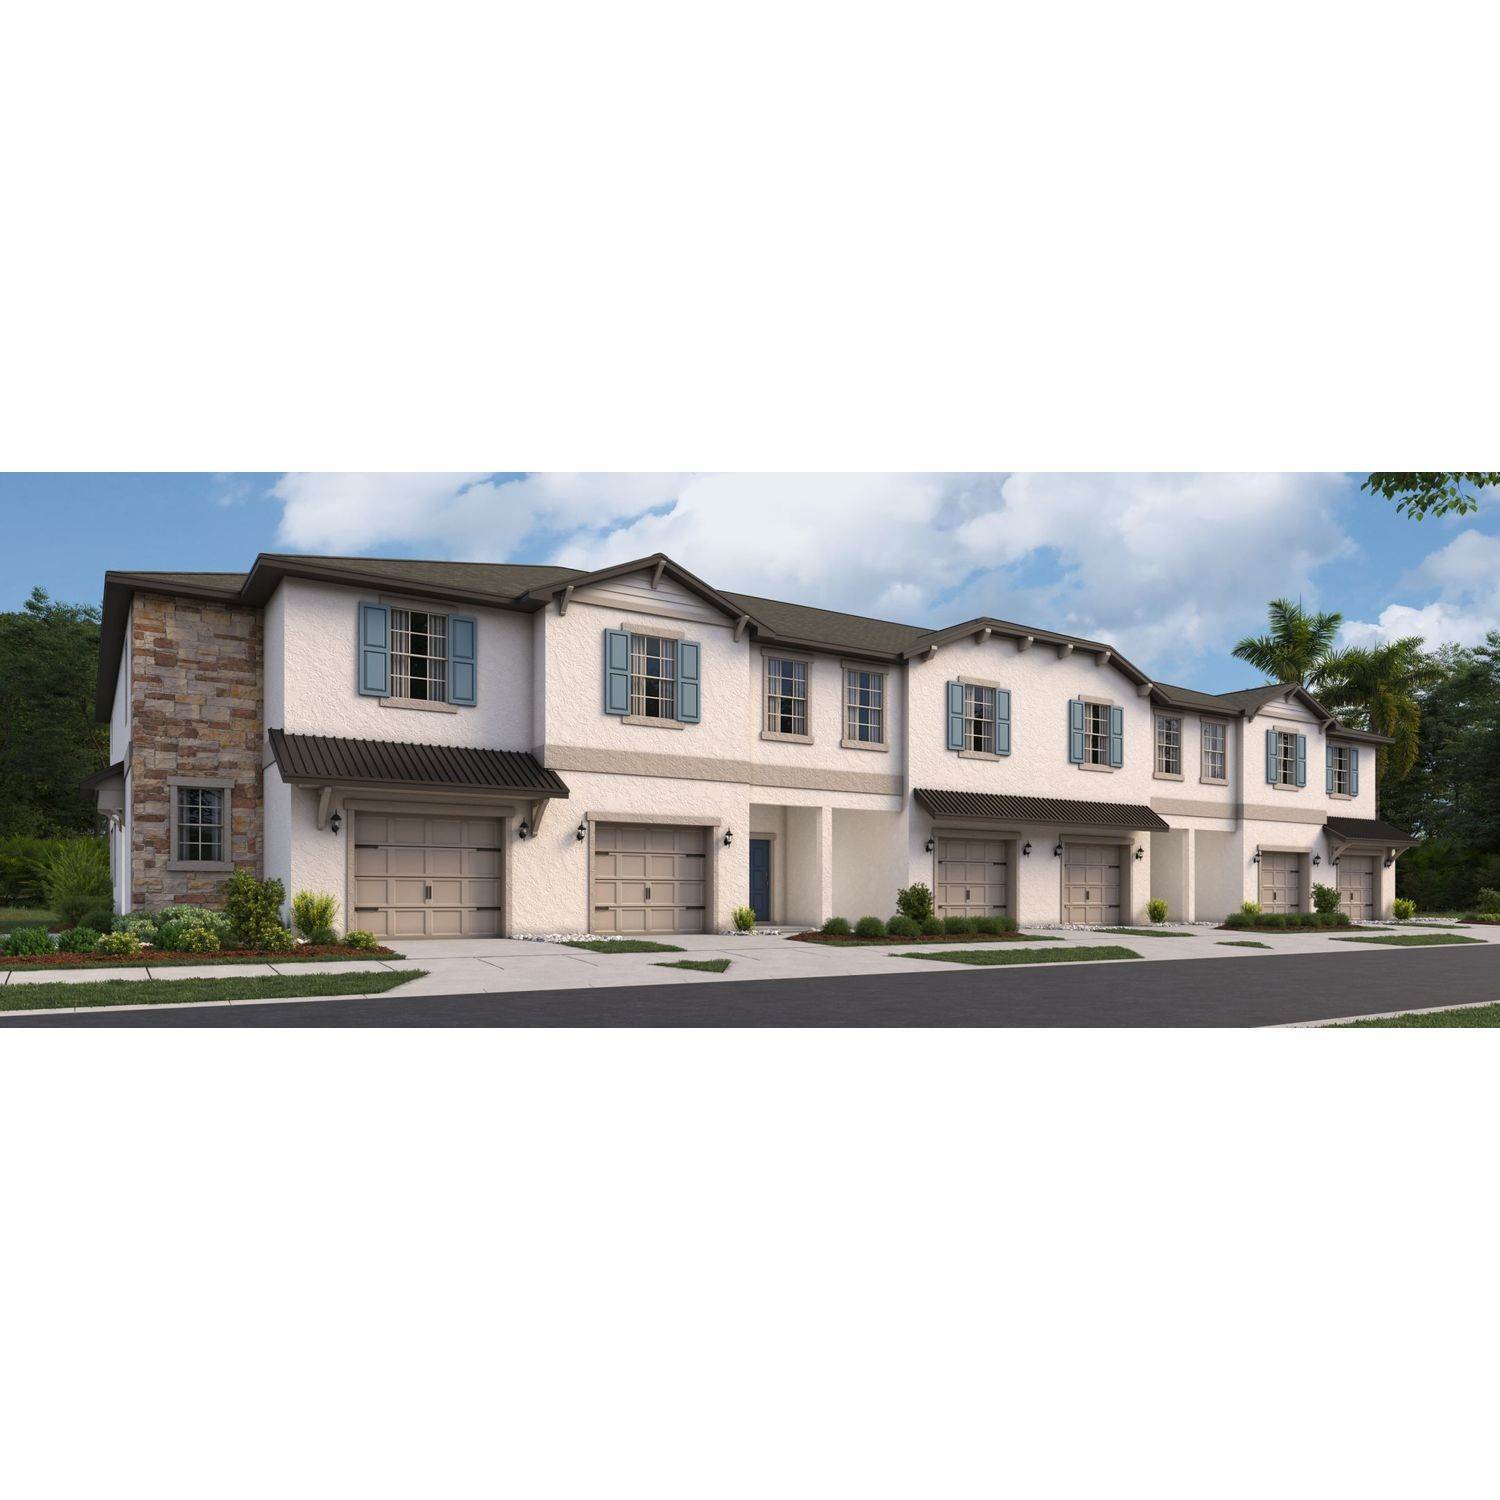 2. Angeline - The Town Estates building at 17516 Nectar Flume Drive, Land O' Lakes, FL 34638